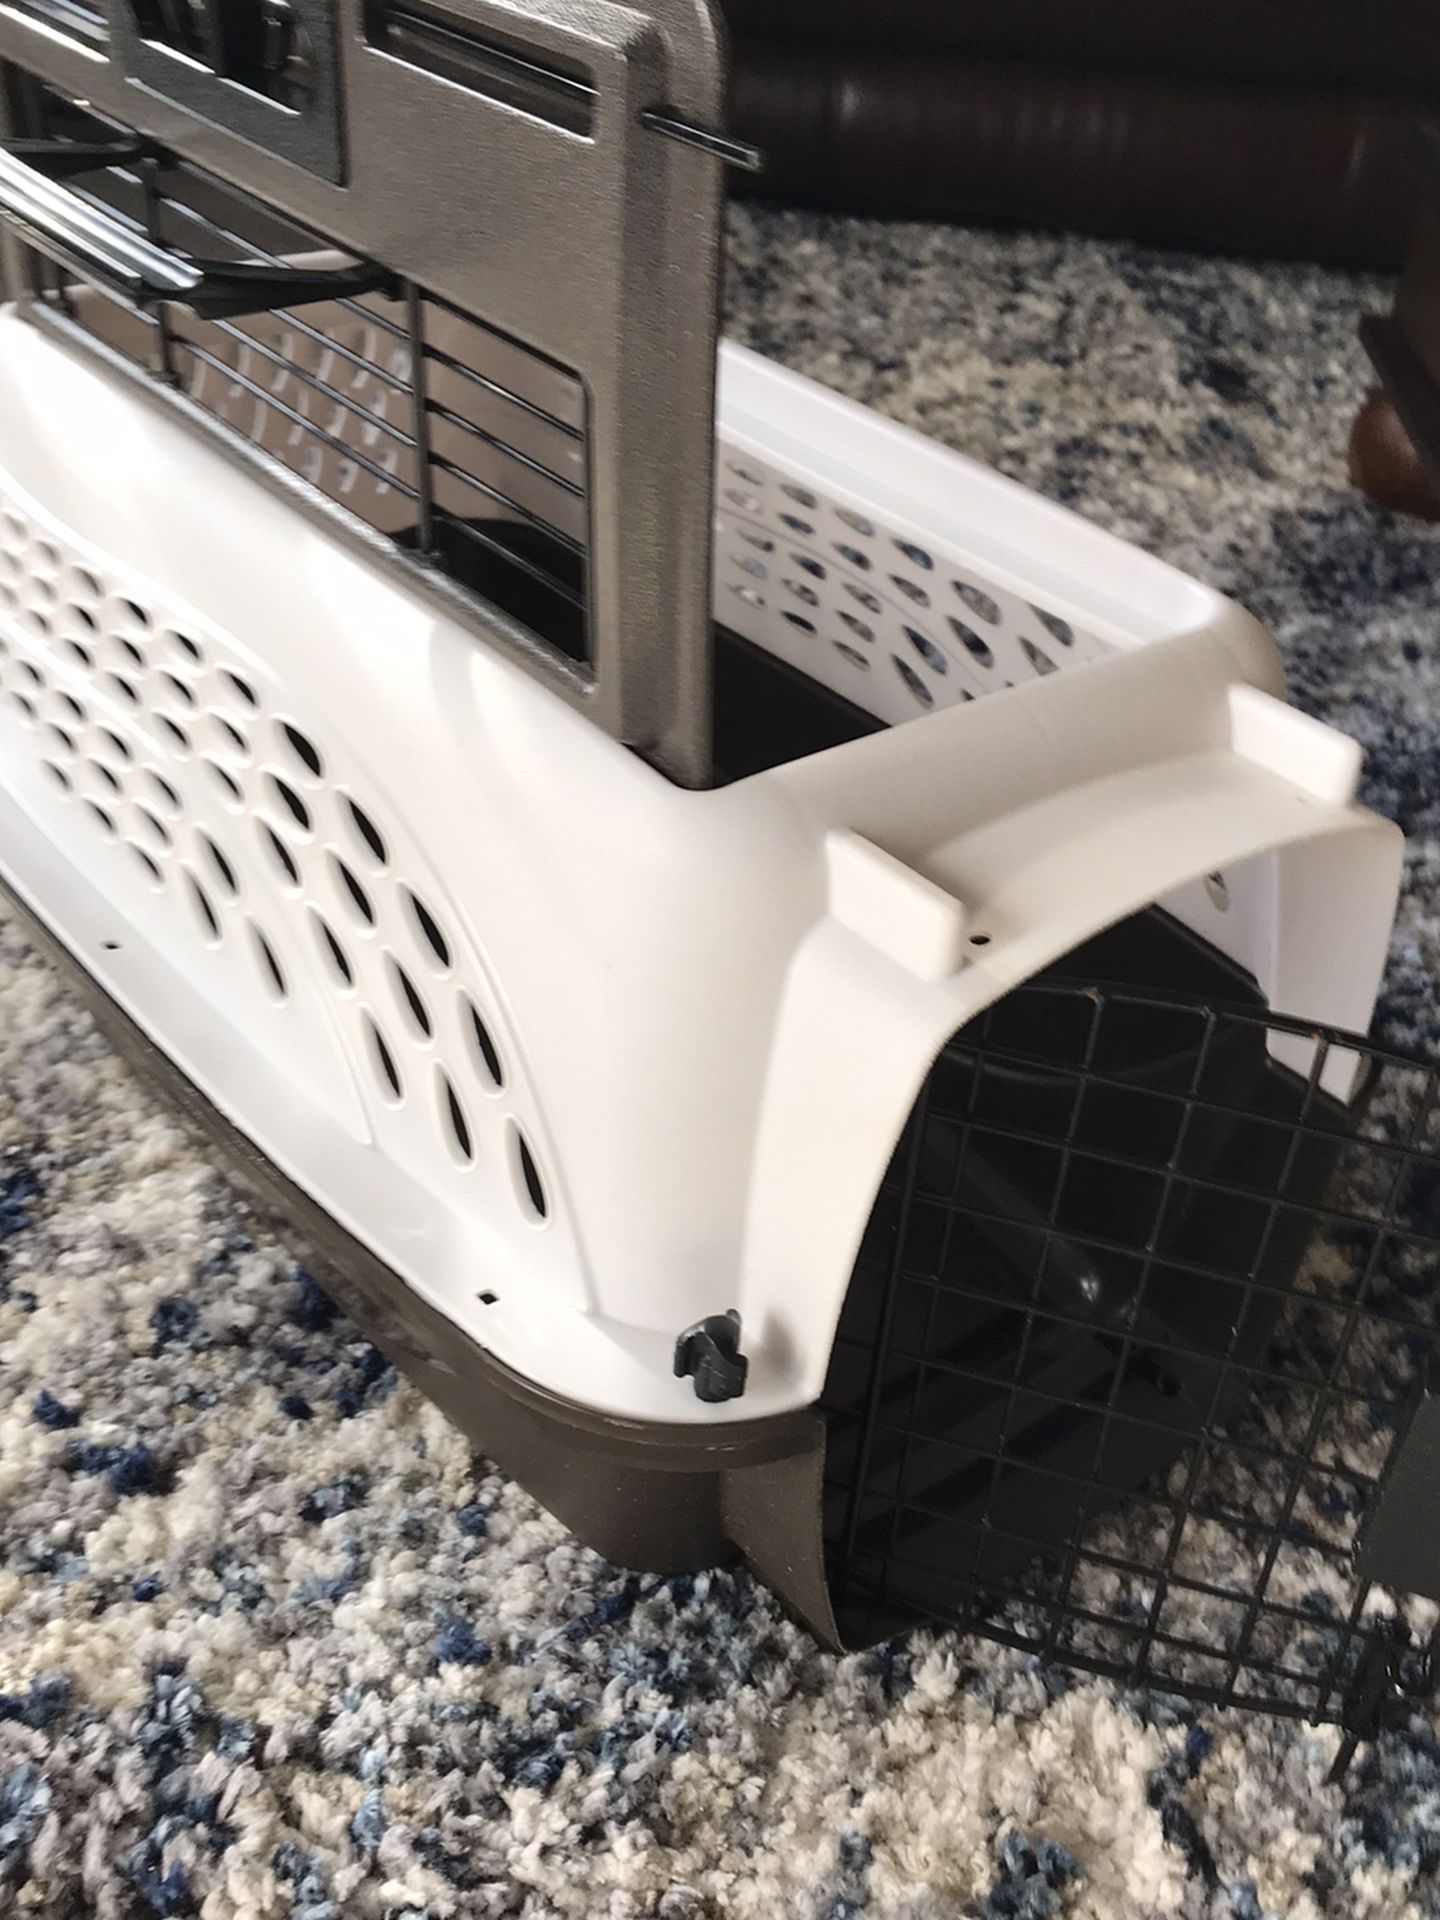 Pet Crate / Carrier / Taxi 19L X 12 W X 10H Top Load Or Front Load